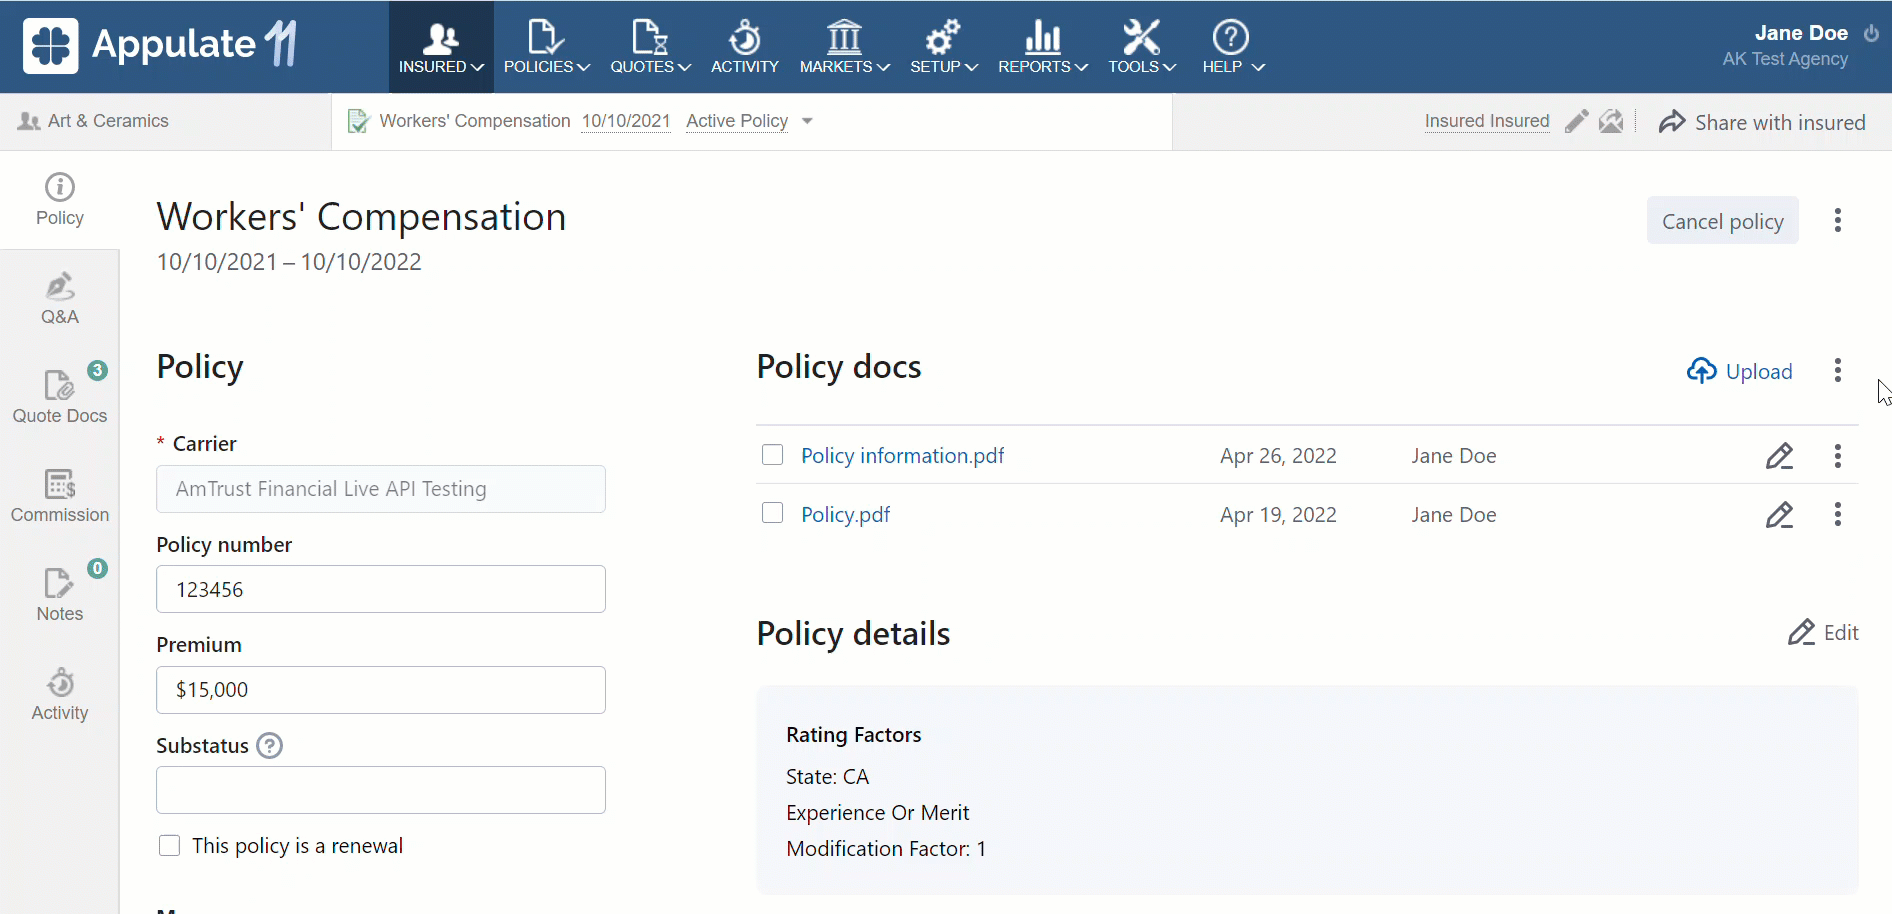 Group actions on documents in the Policy docs section